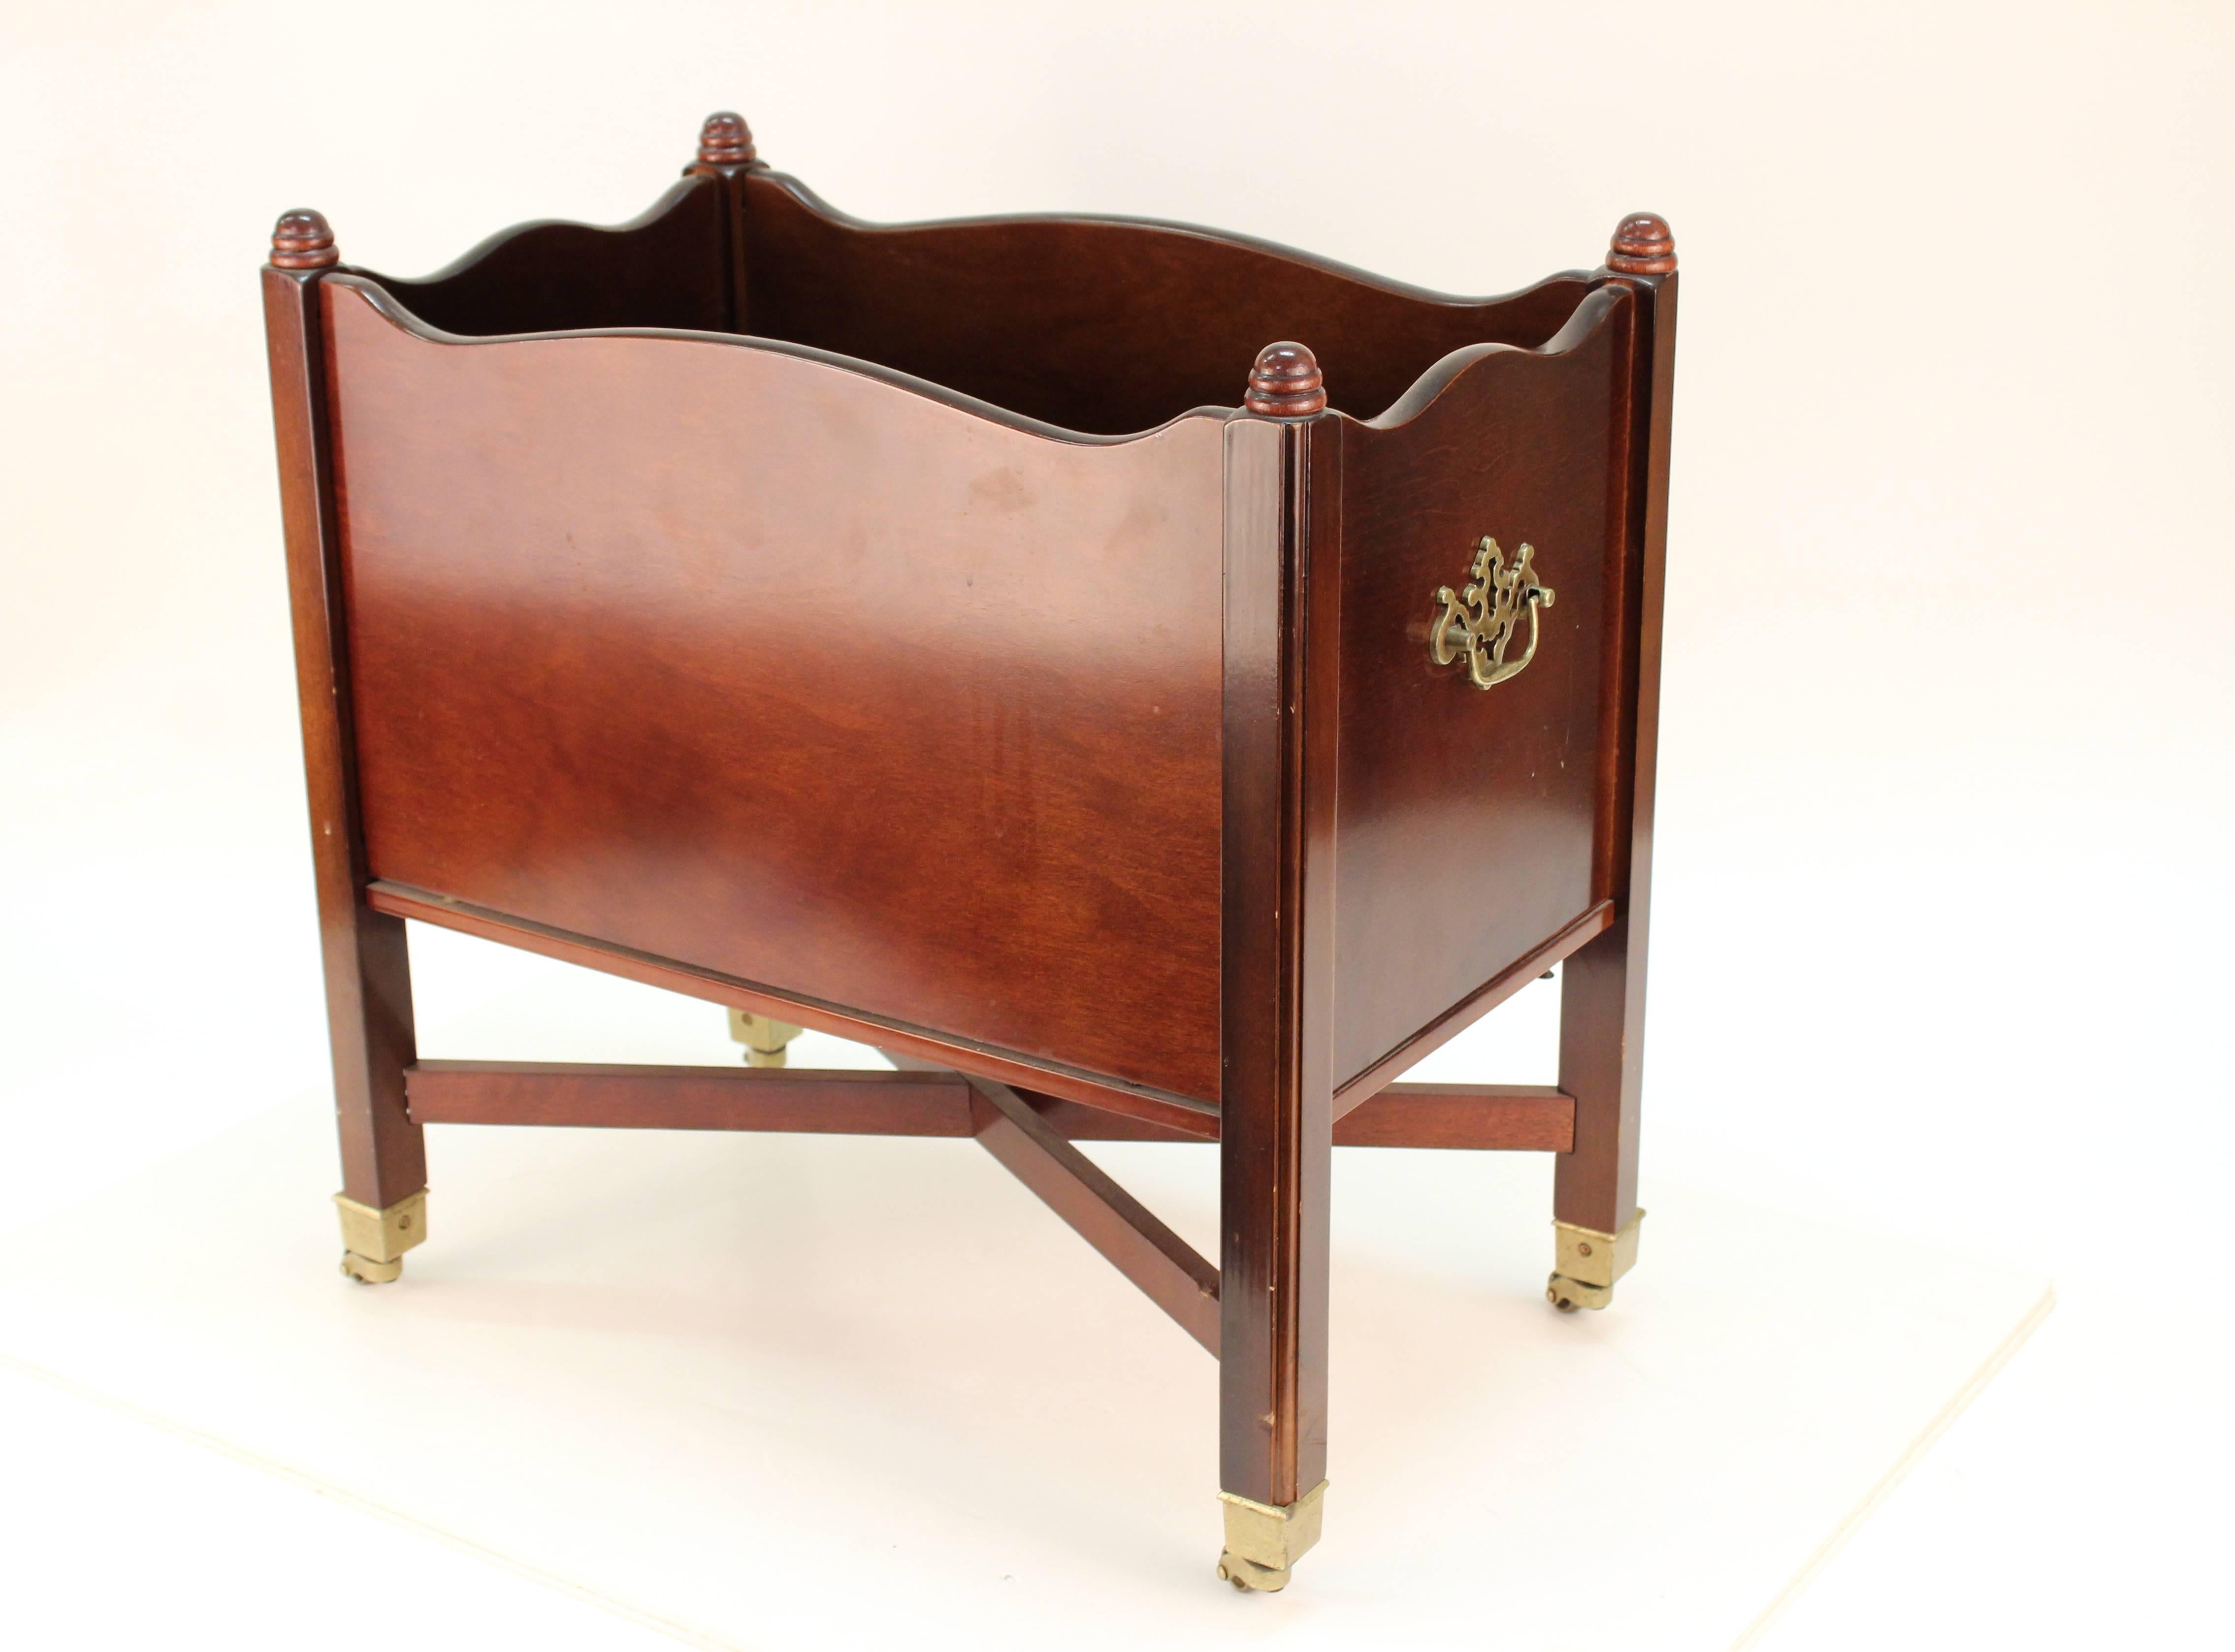 A 20th century Canterbury magazine stand. Features mahogany veneer and two slots. Includes cross base and small casters. Wear consistent with use. The piece is in good condition.